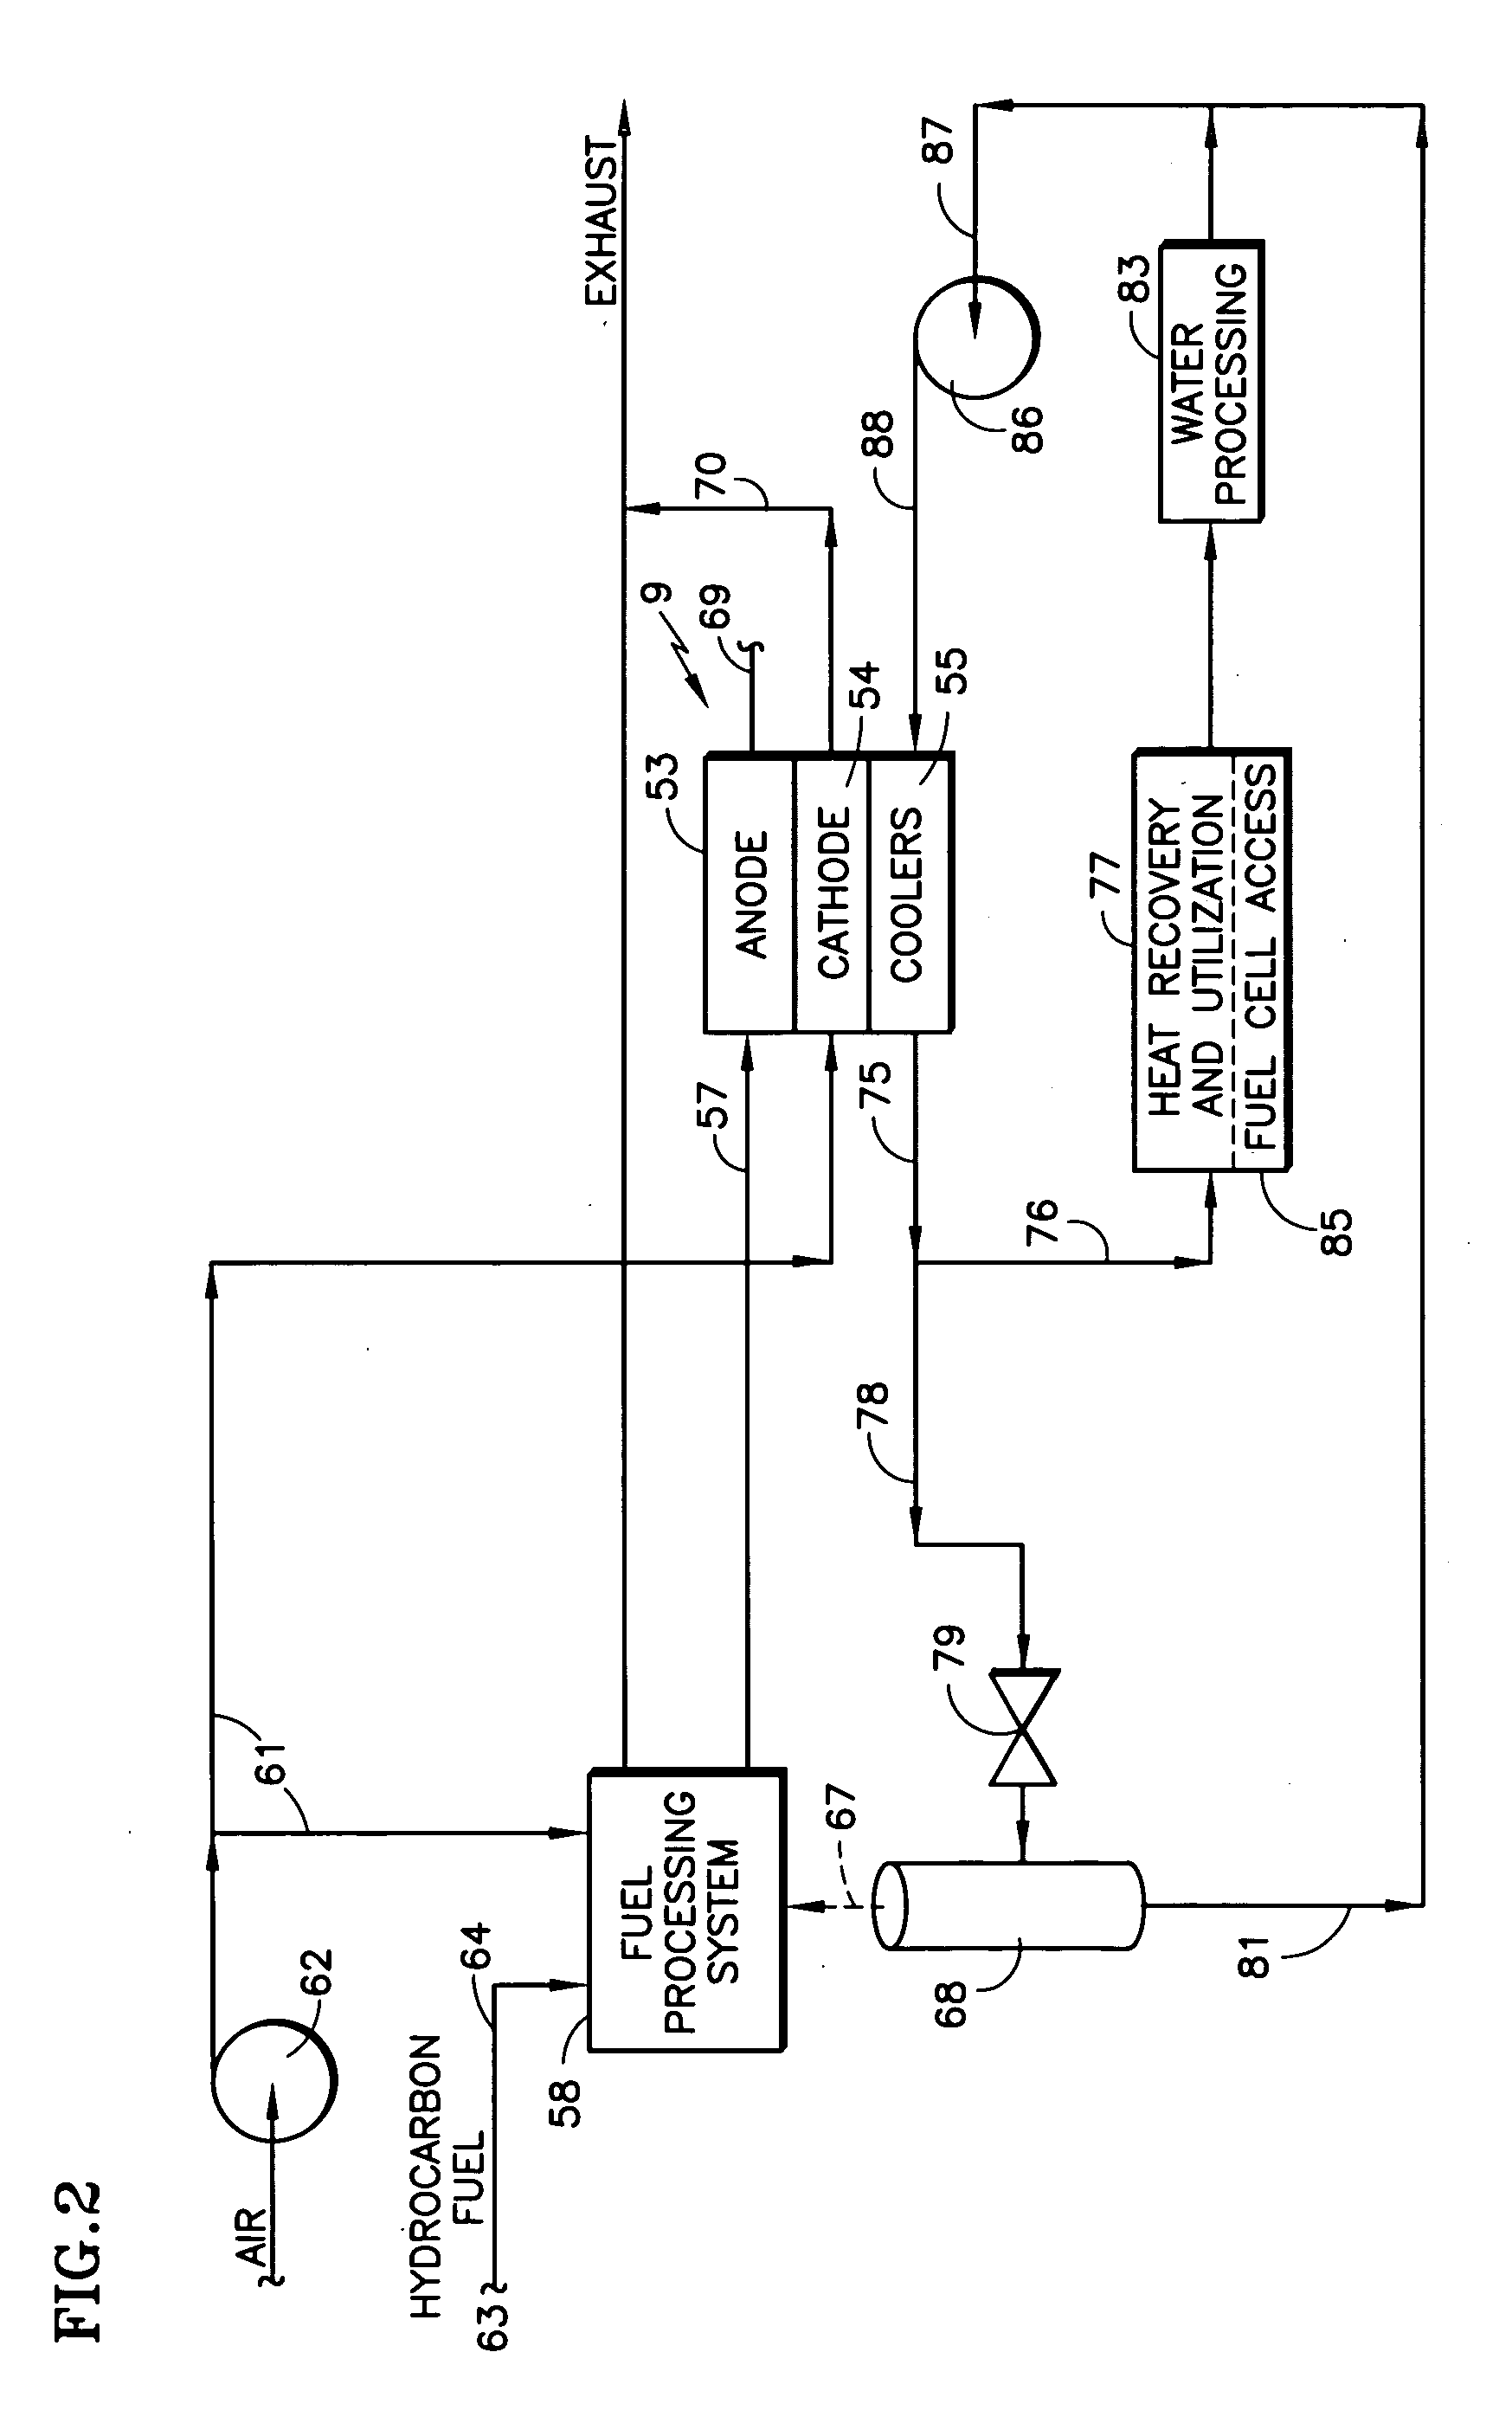 Fuel cell in combined heat and electric power system